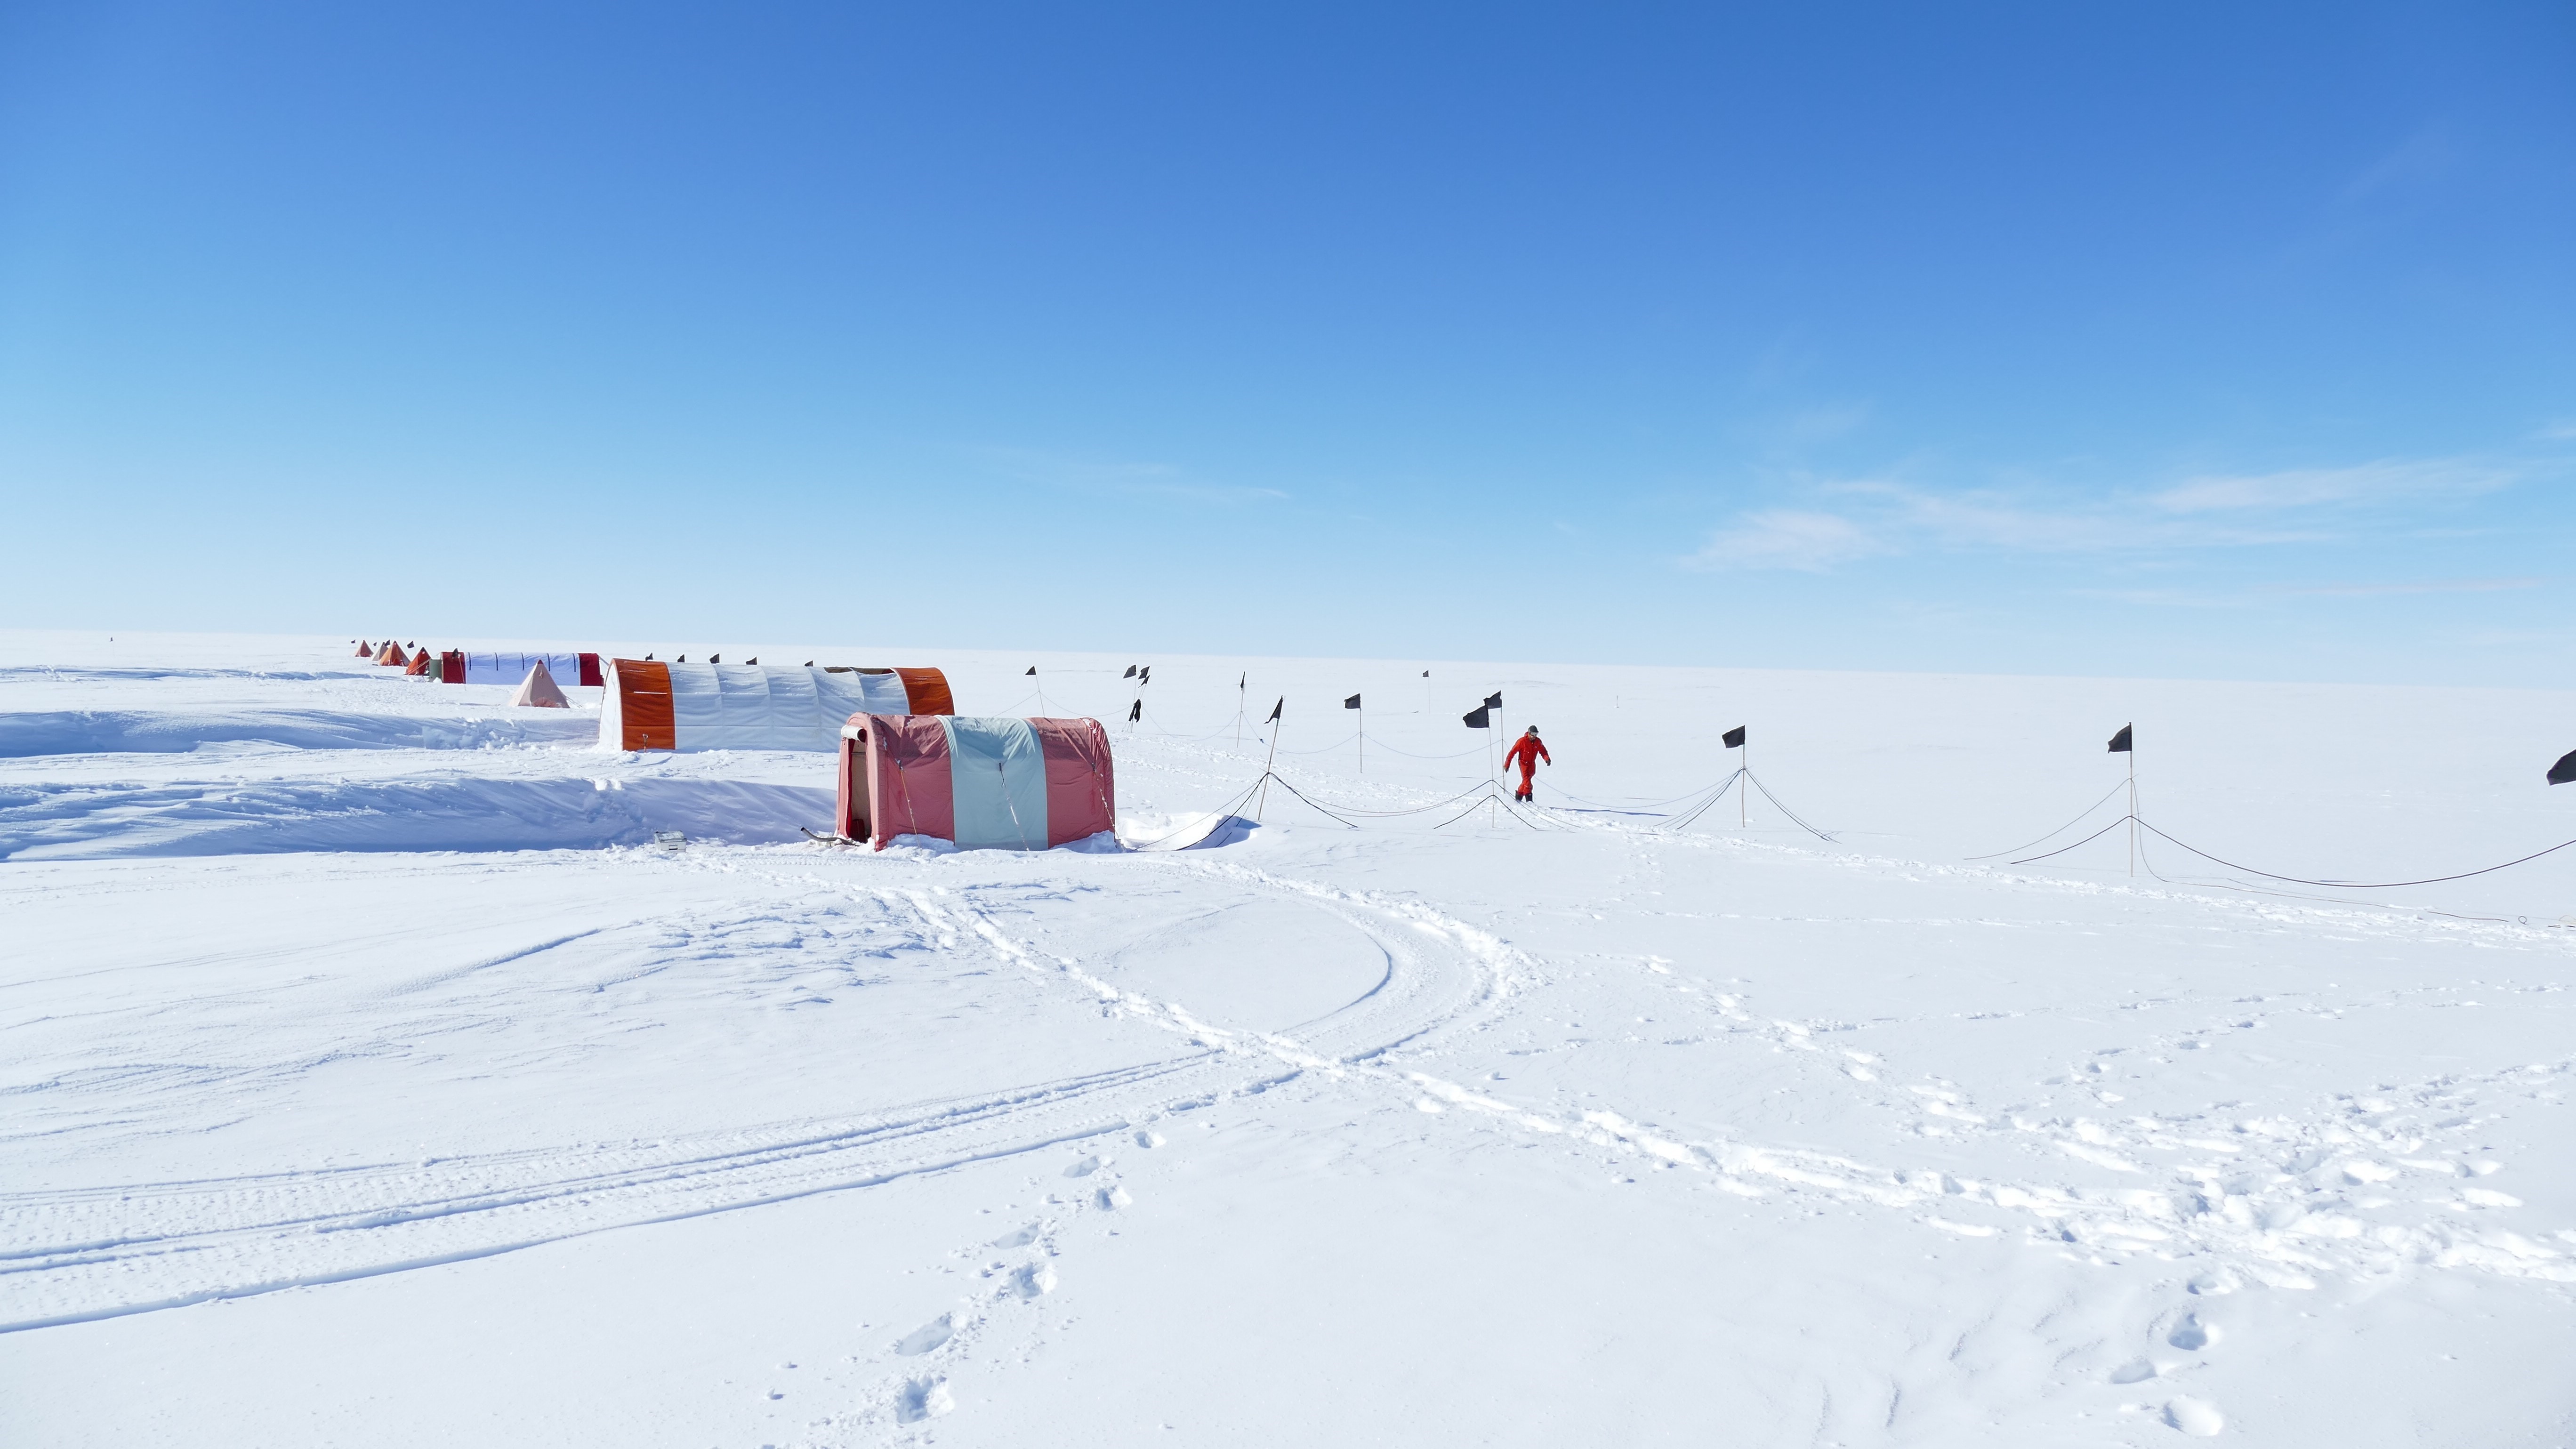 Image of tents set up on the snow in Antarctica